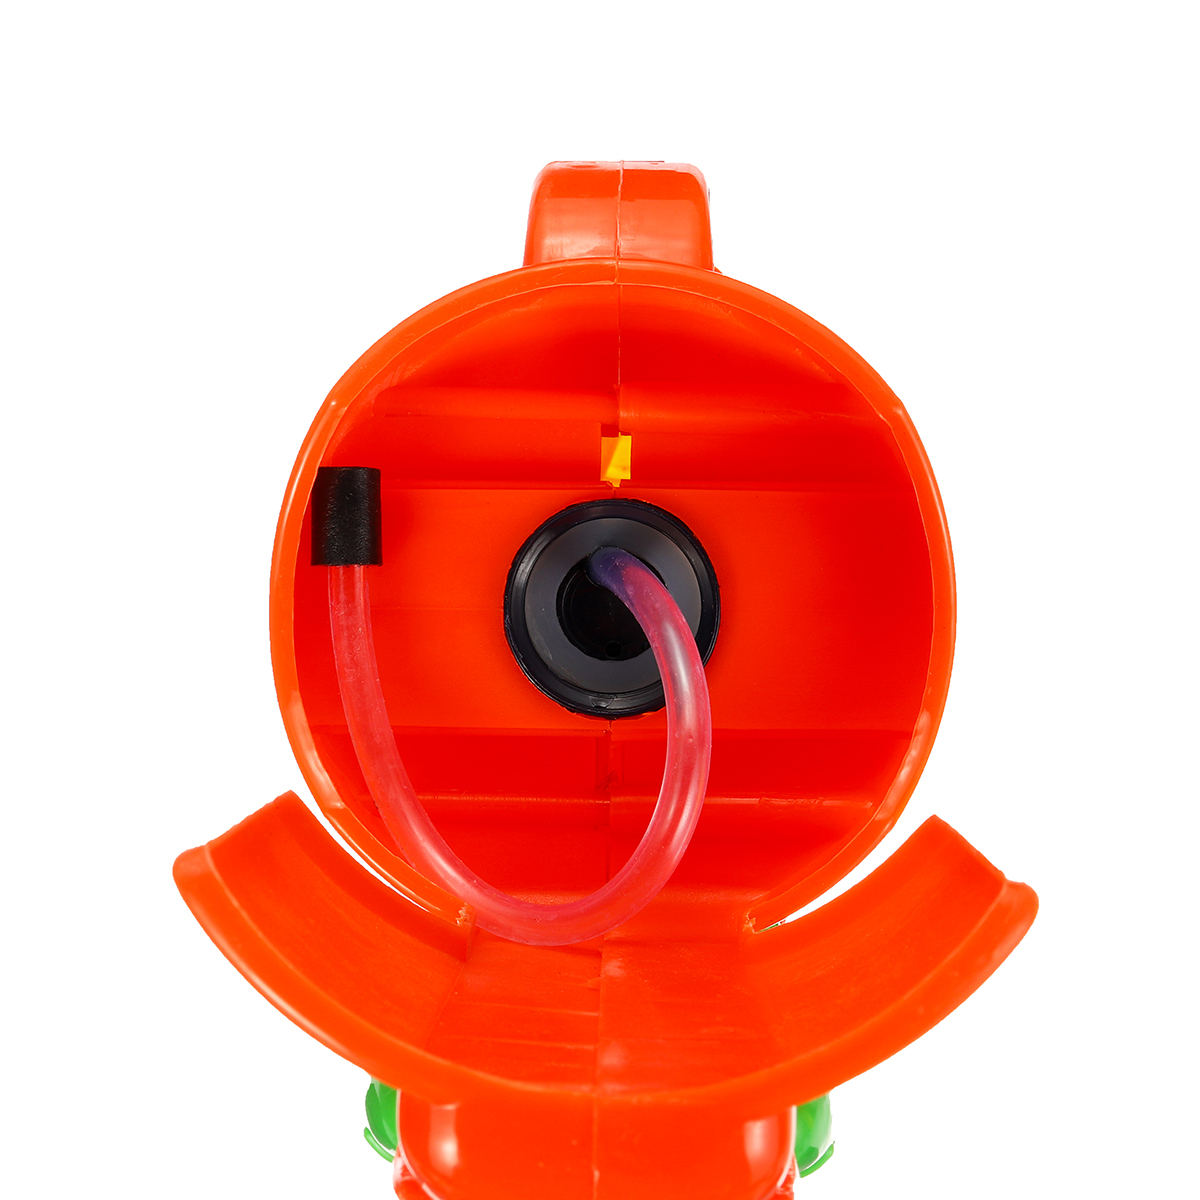 1500ml-Red-Or-Blue-Toy-Water-Sprinkler-With-A-Range-Of-7-9m-Plastic-Water-Sprinkler-For-Children-Bea-1703042-8